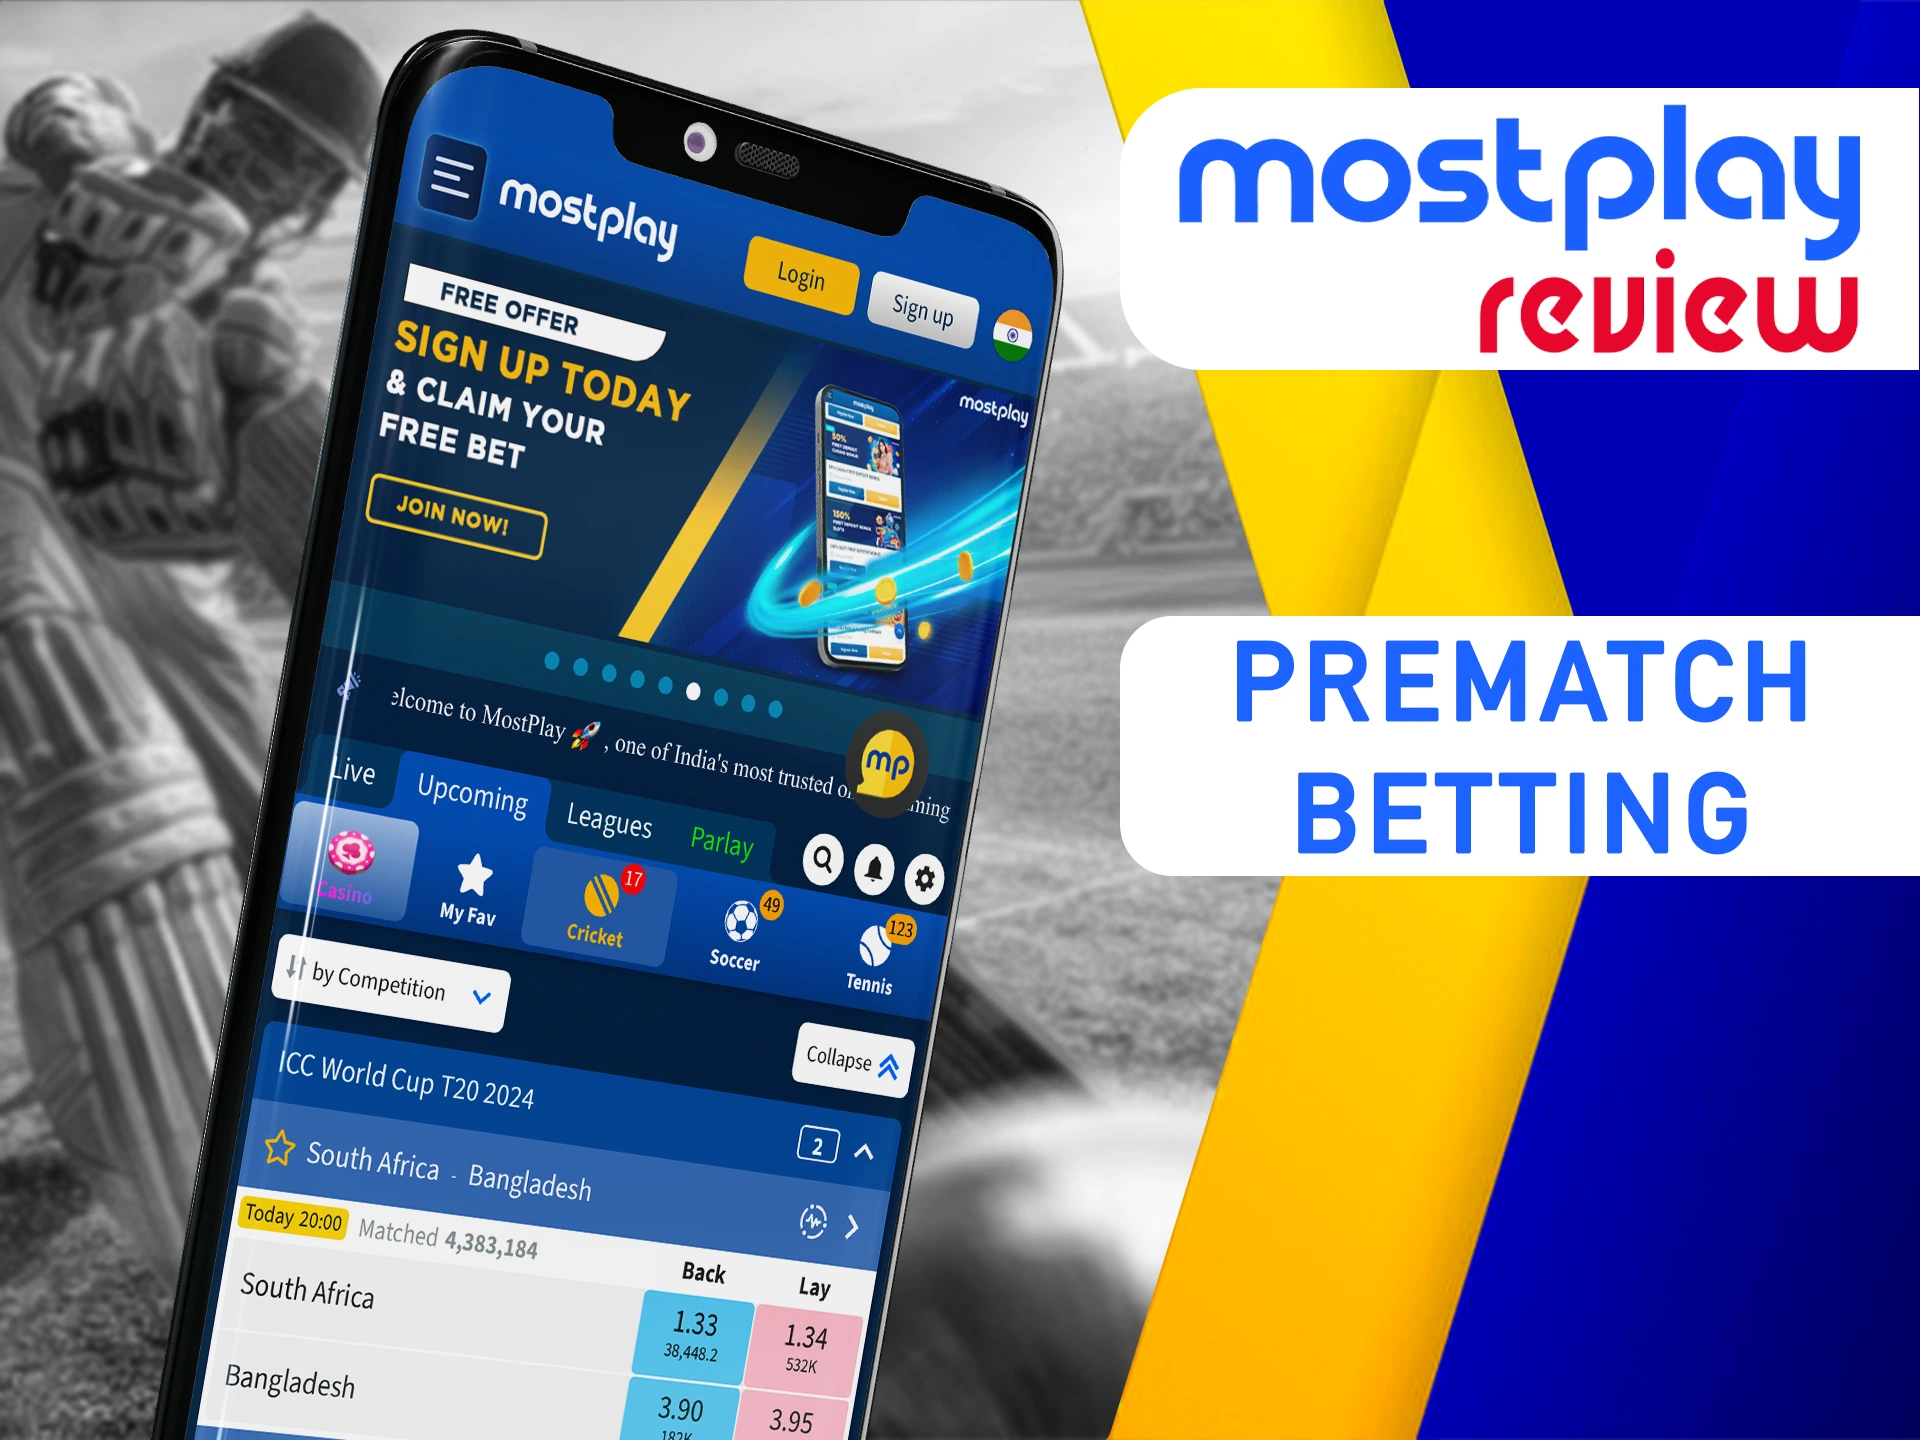 Make sure to bet on future events and wait until it happens at Mostplay.